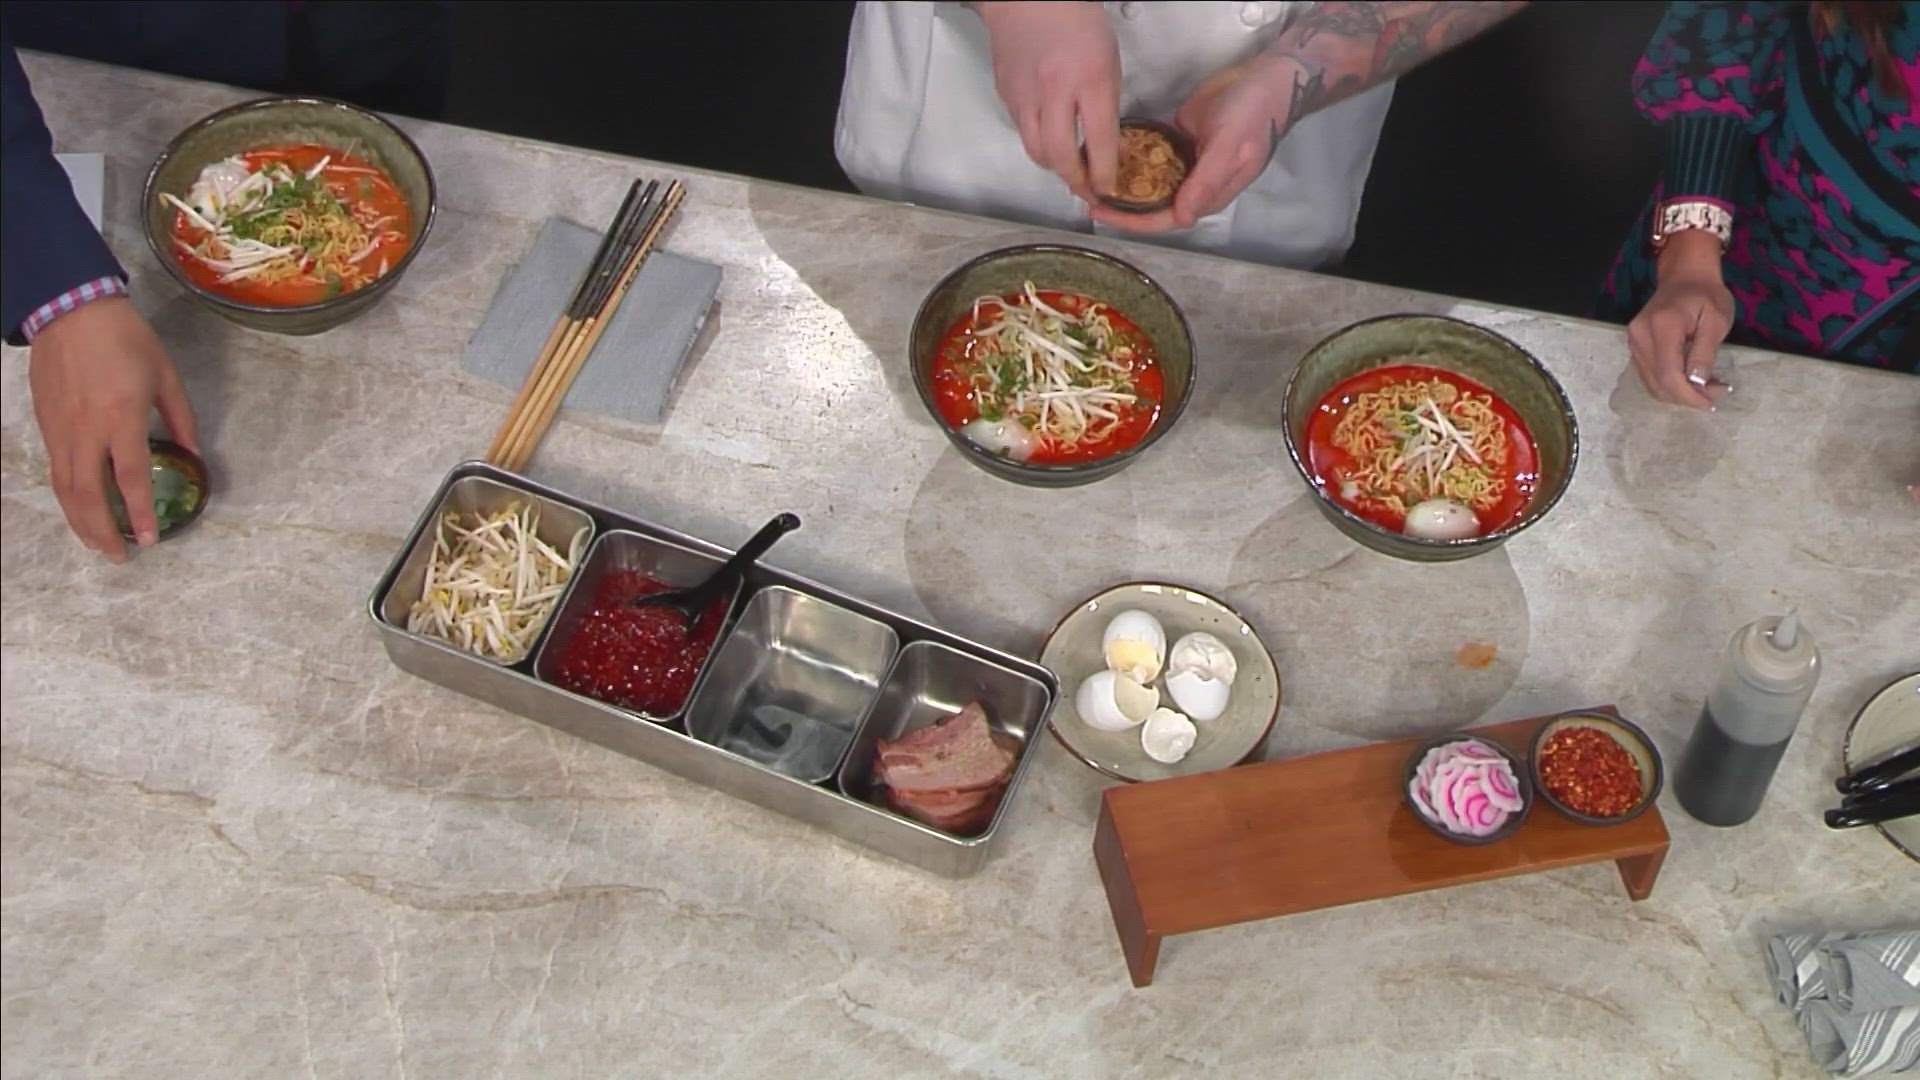 March is National Noodle Day. Chef and co-owner of Glo Noodle House Chris Teigland takes a through the process of making homemade ramen.